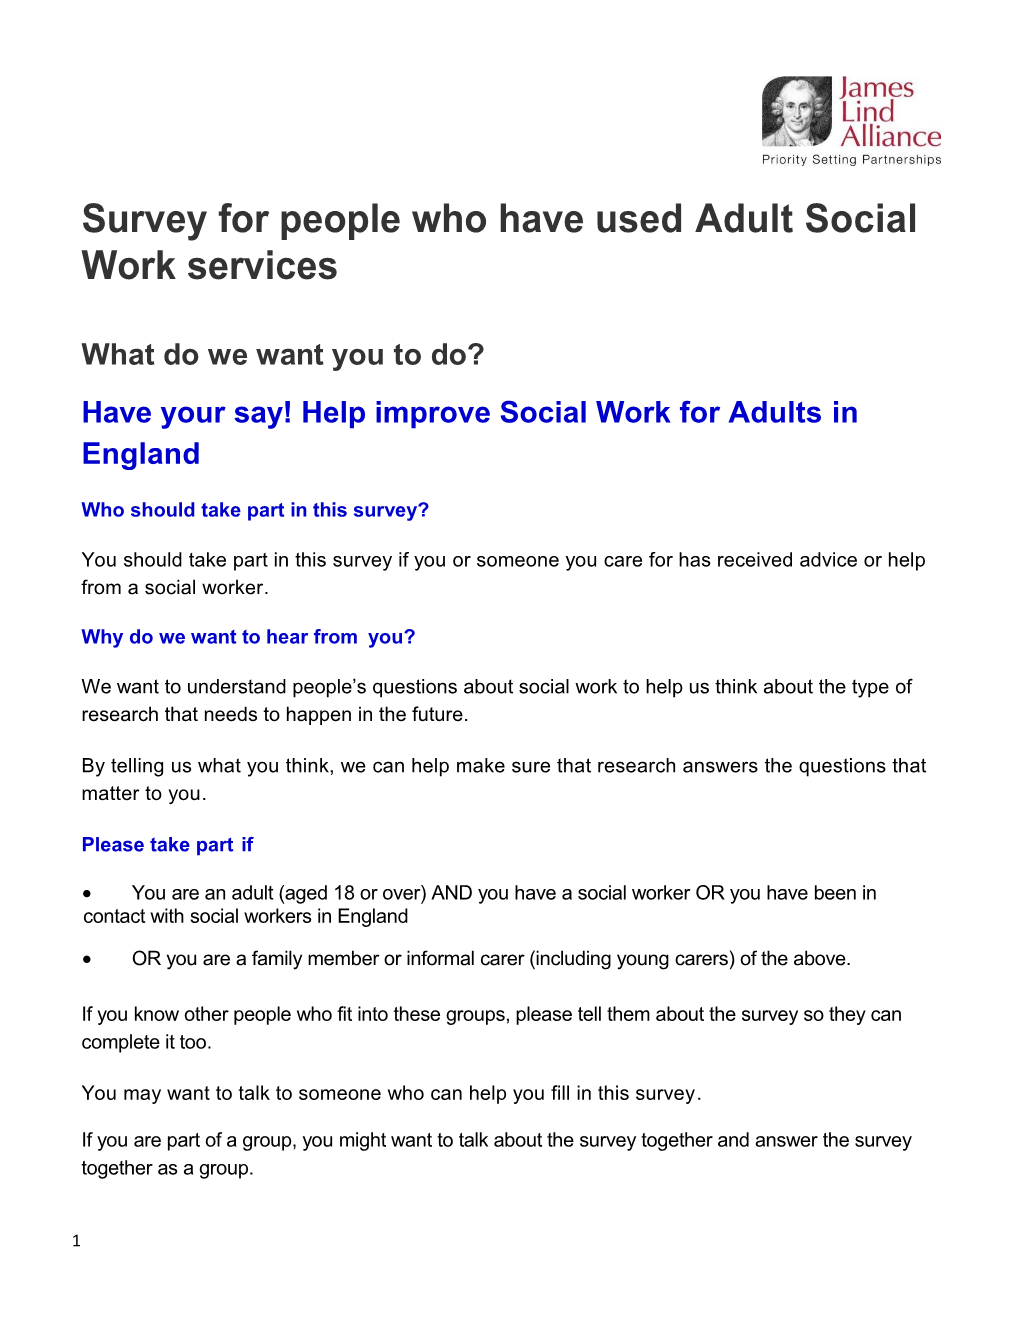 Survey for People Who Have Used Adultsocialworkservices